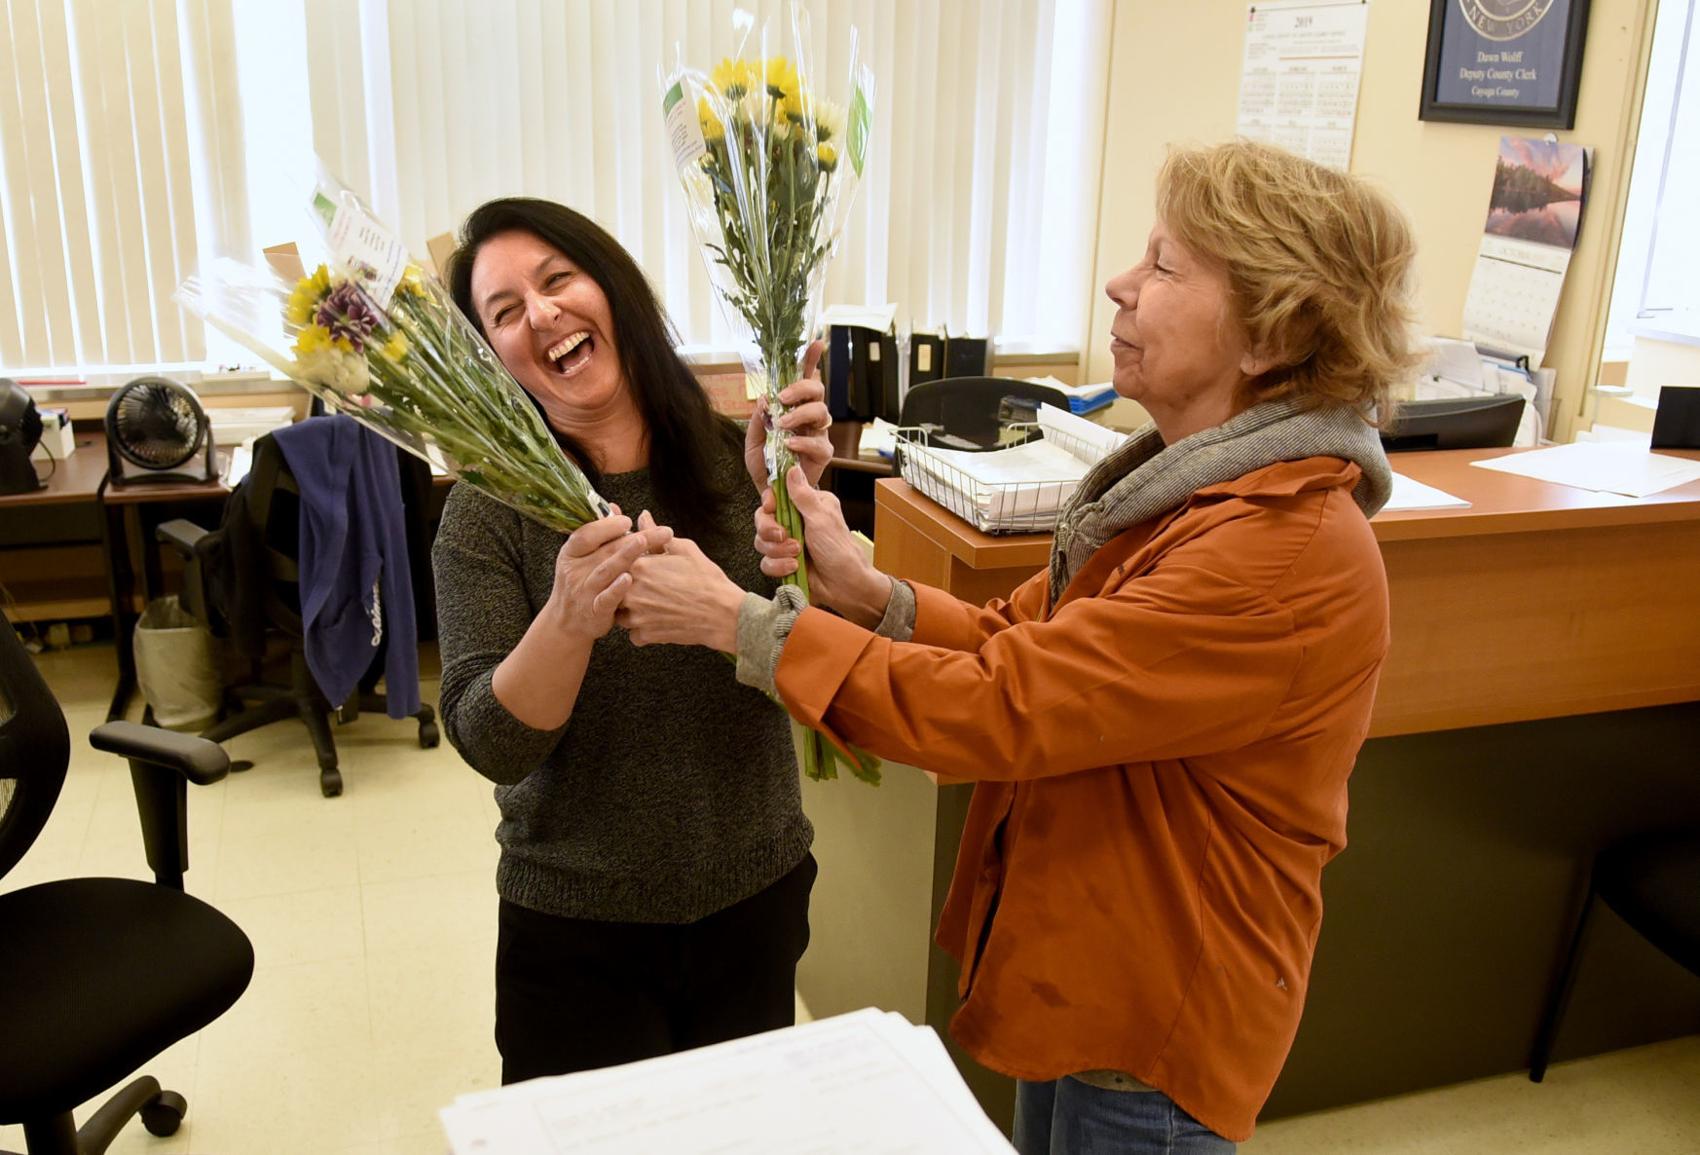 Gallery: Petal It Forward bouquets bring smiles to the faces of strangers in Auburn